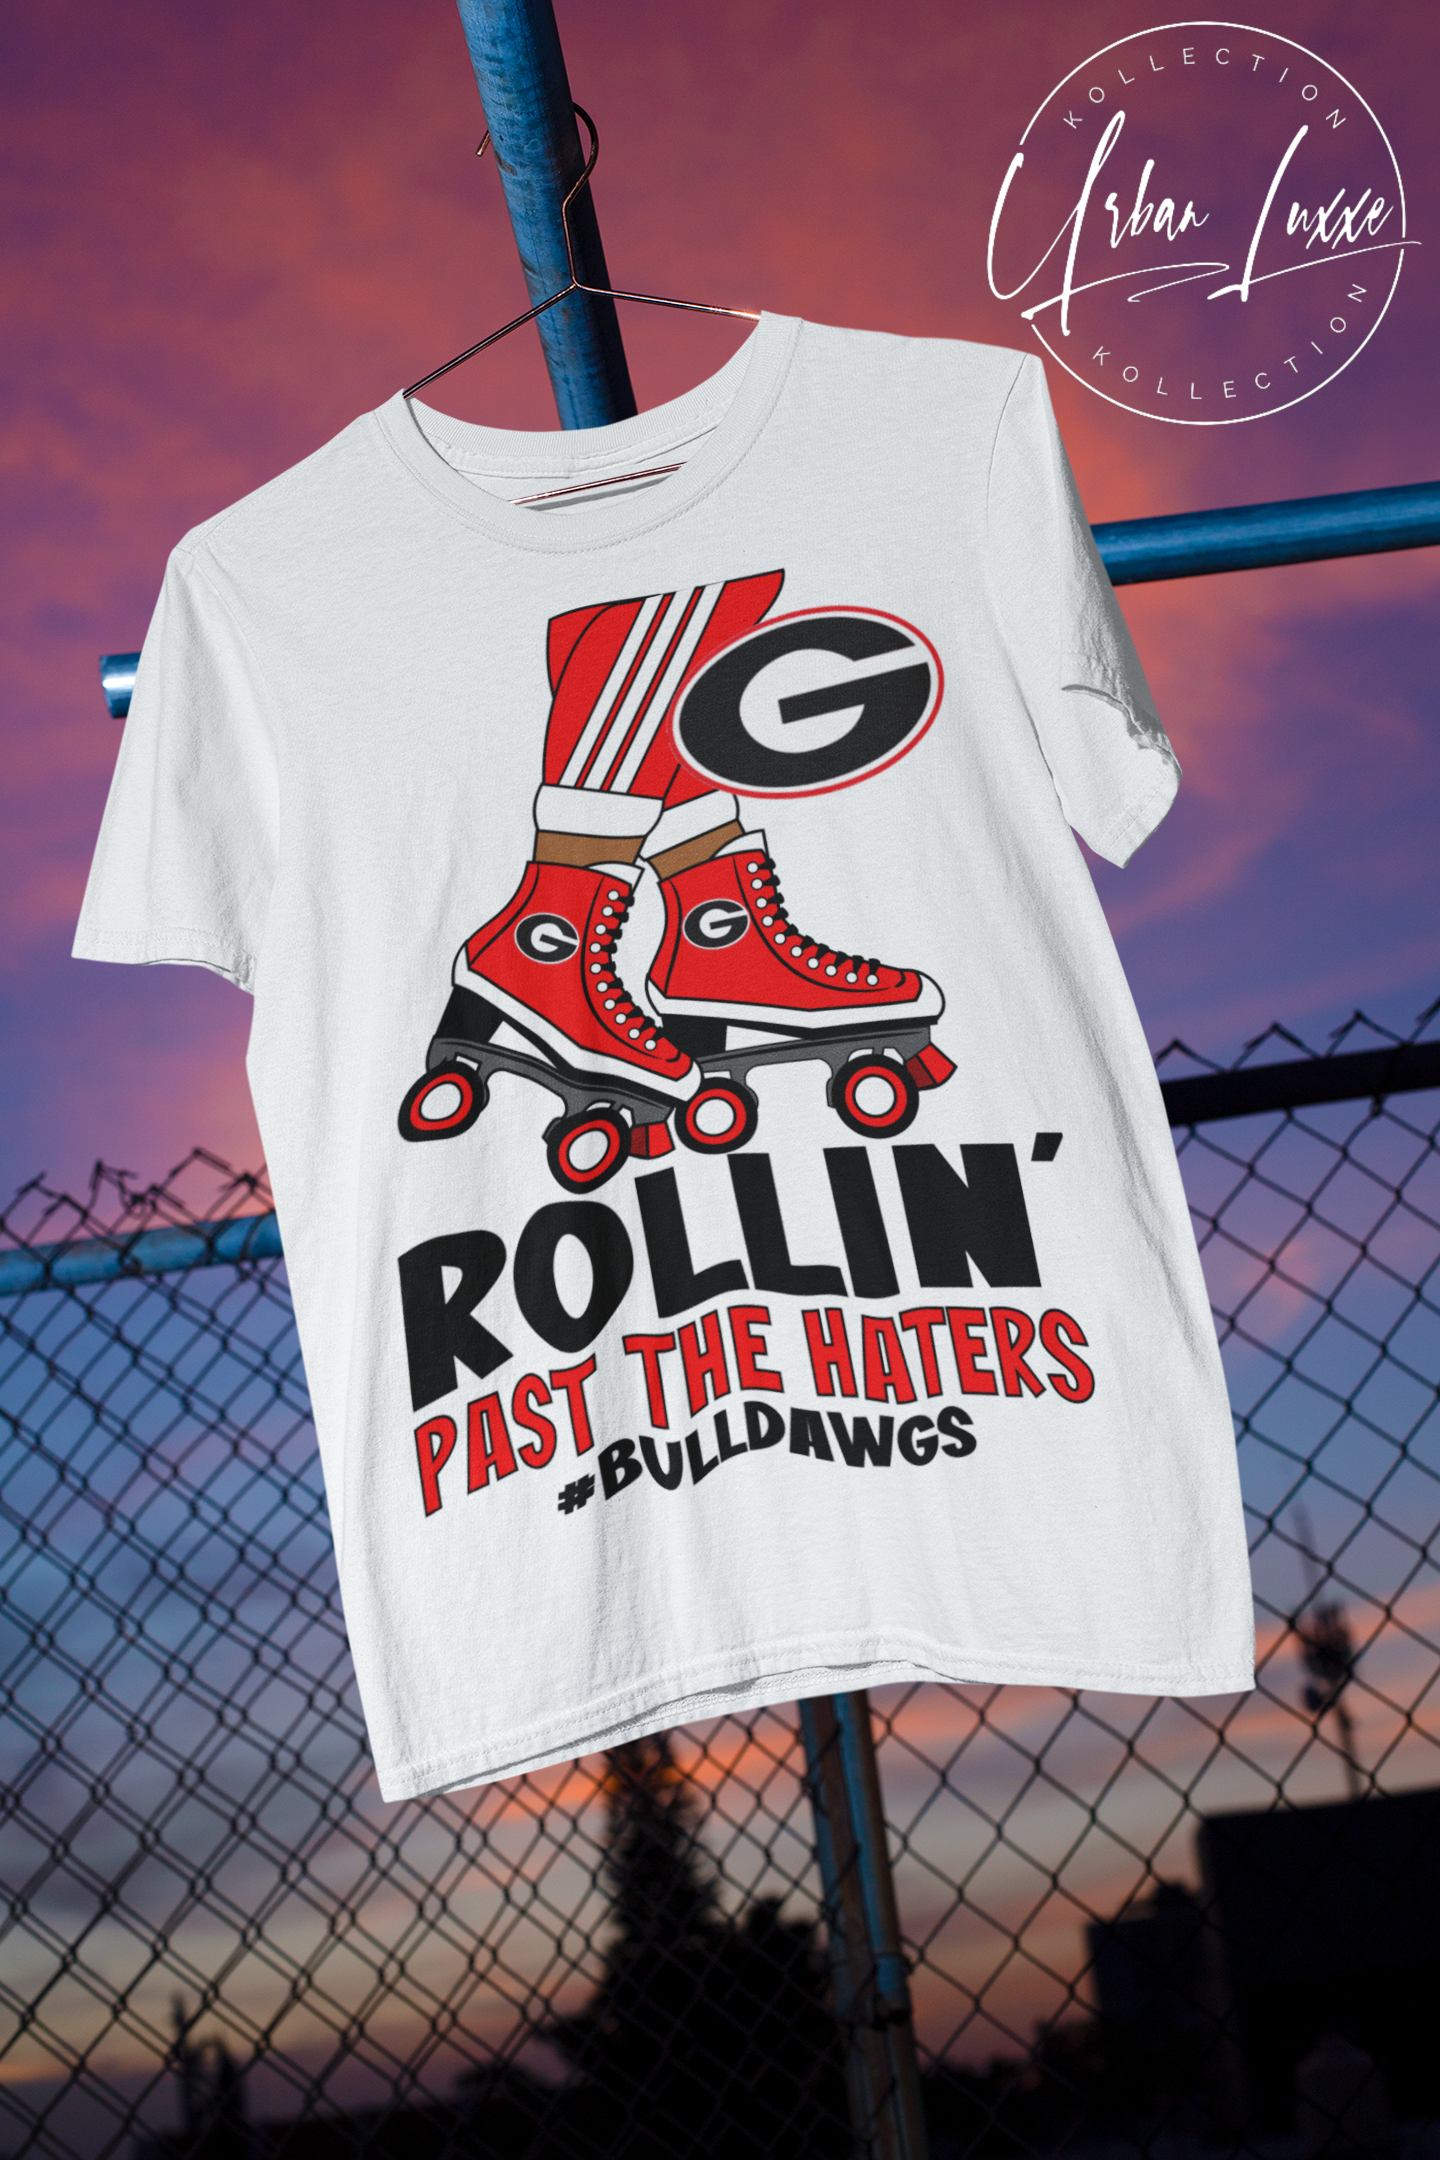 Rollin’ Past The Haters Georgia Bulldogs T-shirt